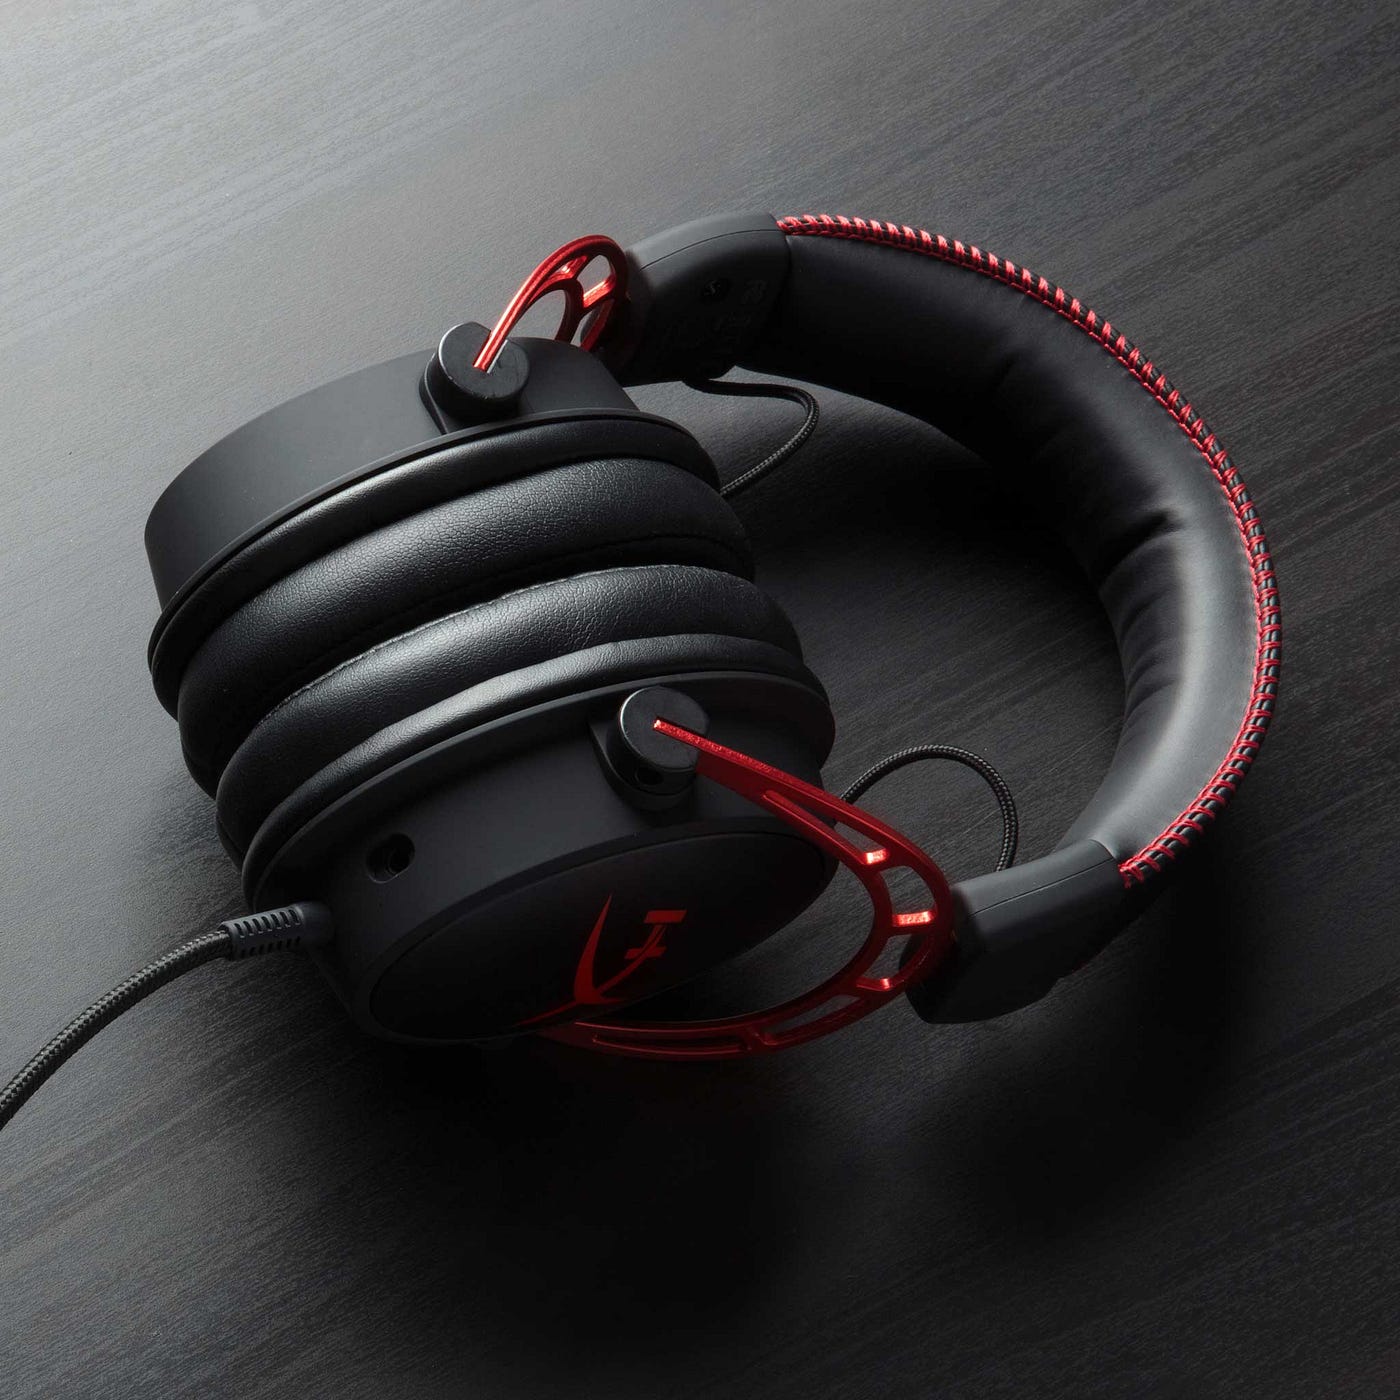 What Gaming Headset Should I Buy? And Why Do They All Look So